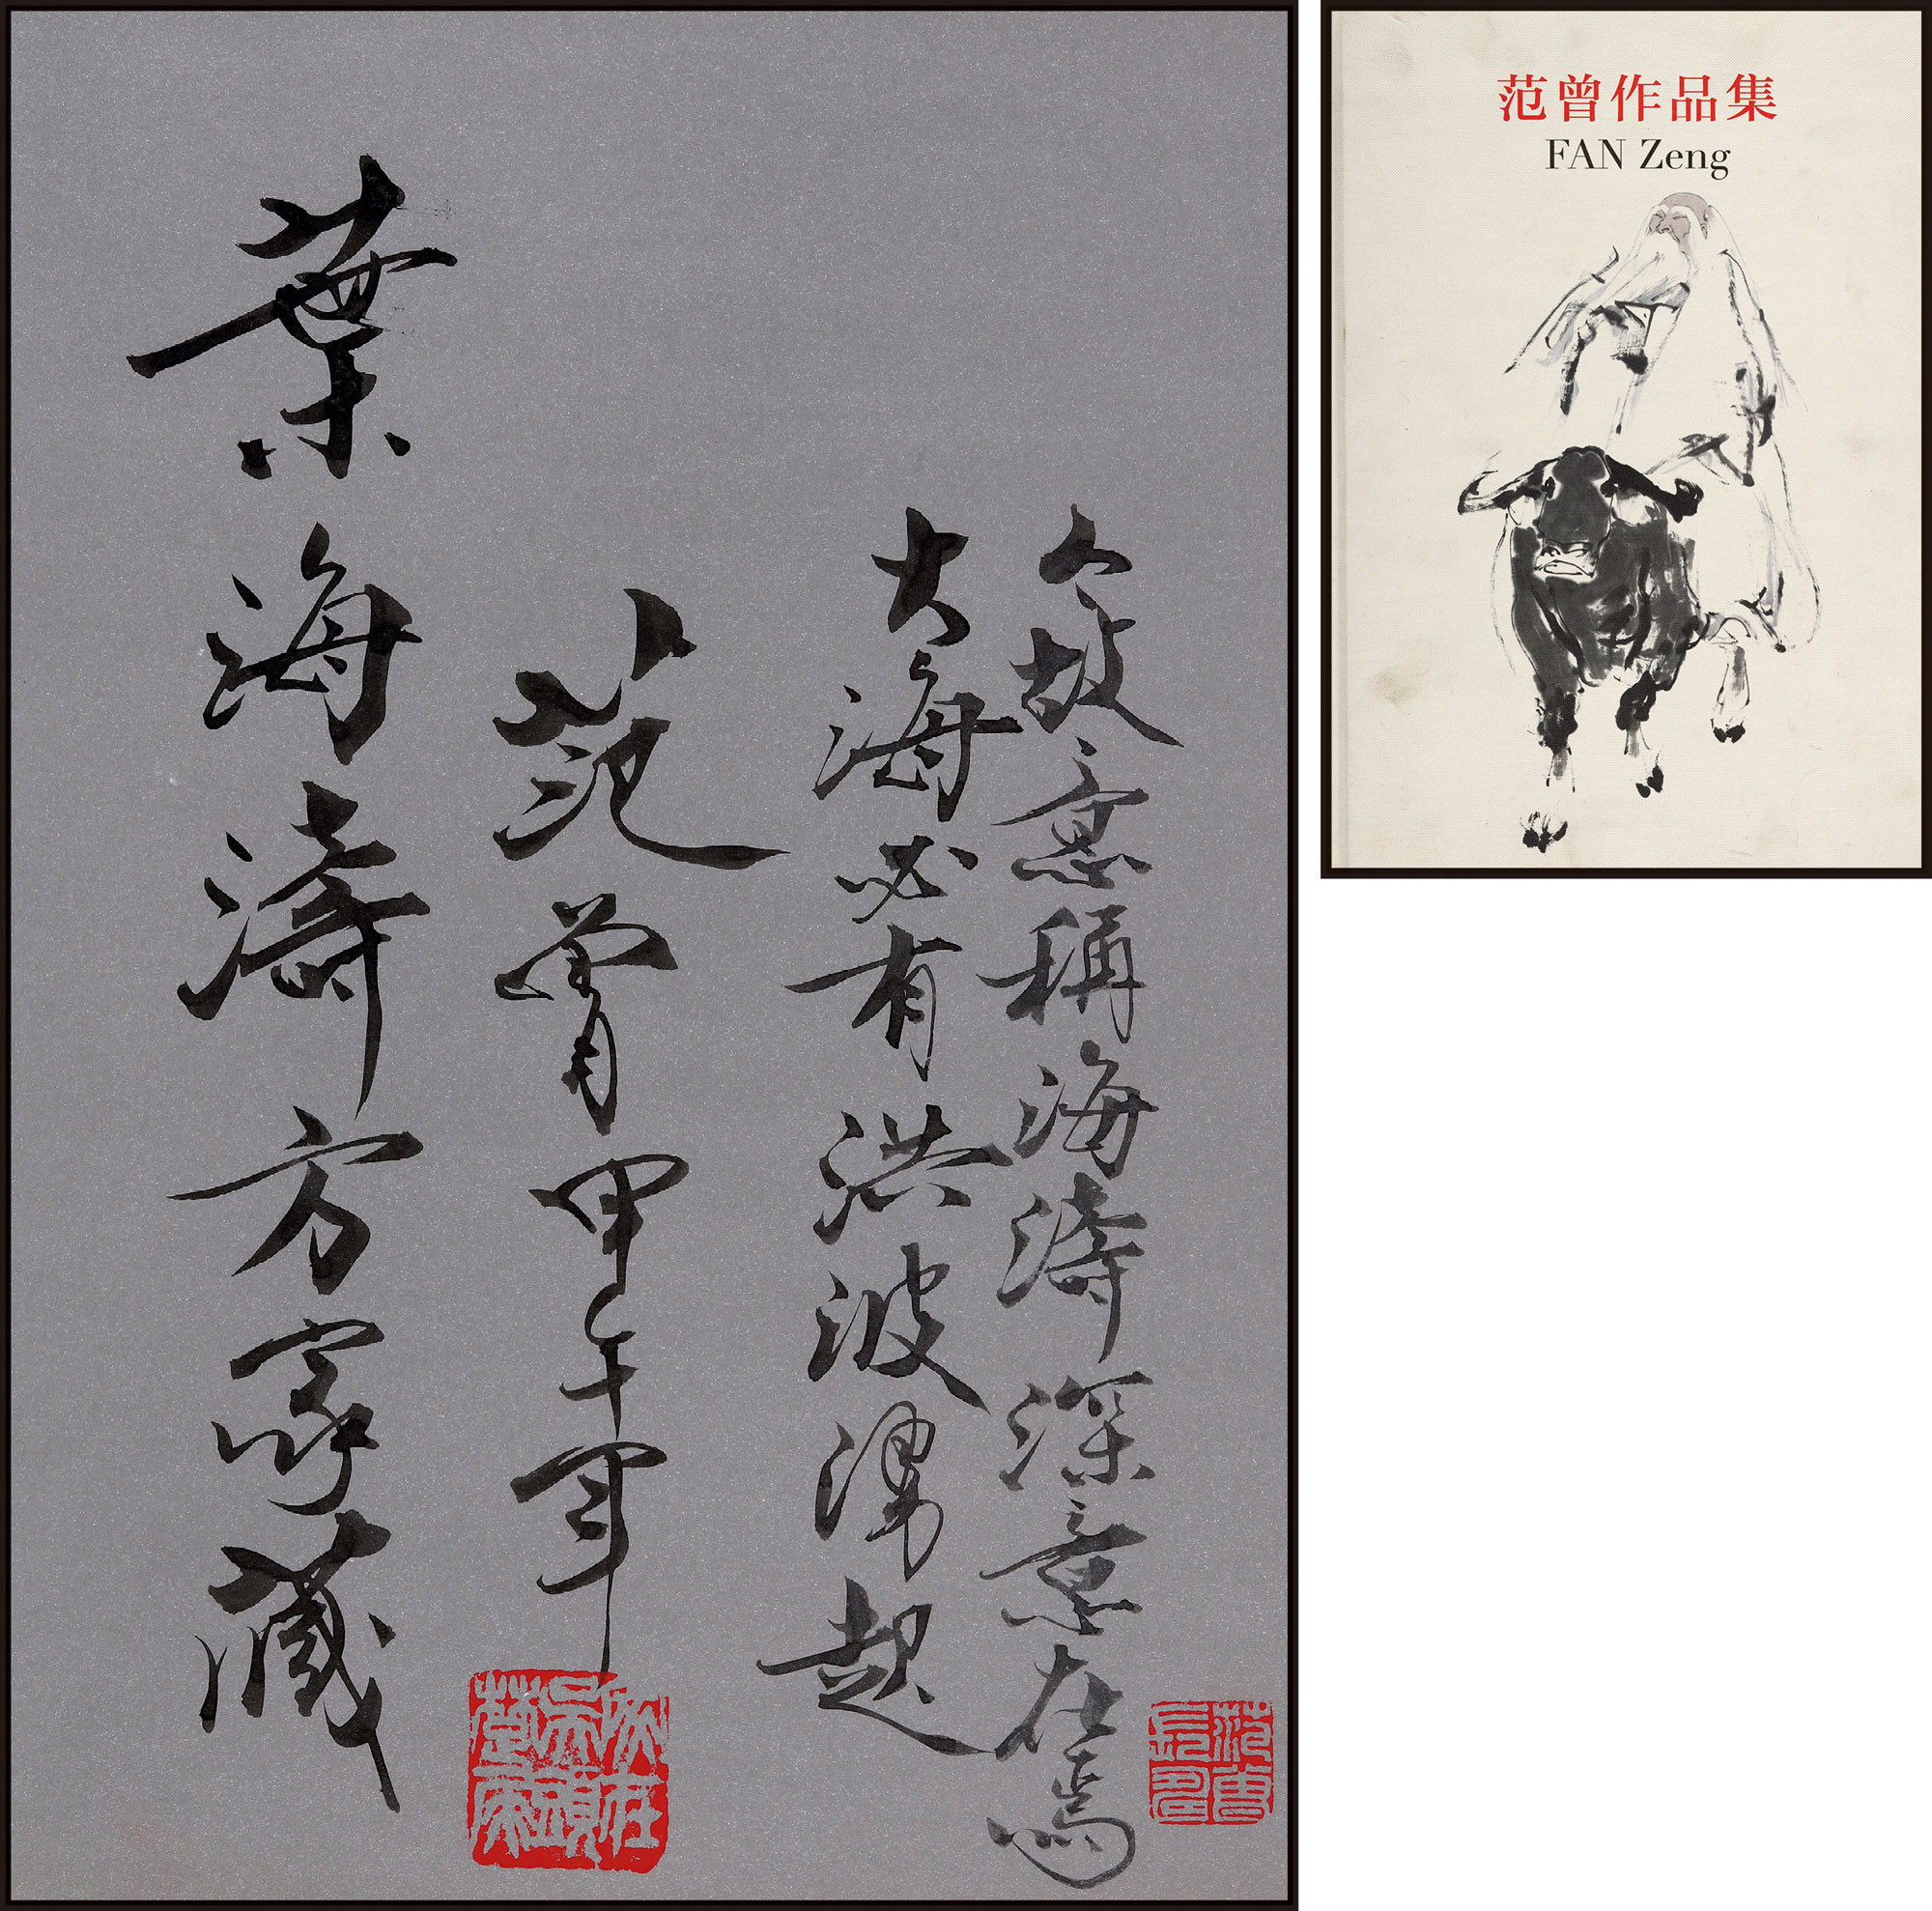 The poem and paint album Collection of Fan Zeng’s works of Fan Zeng